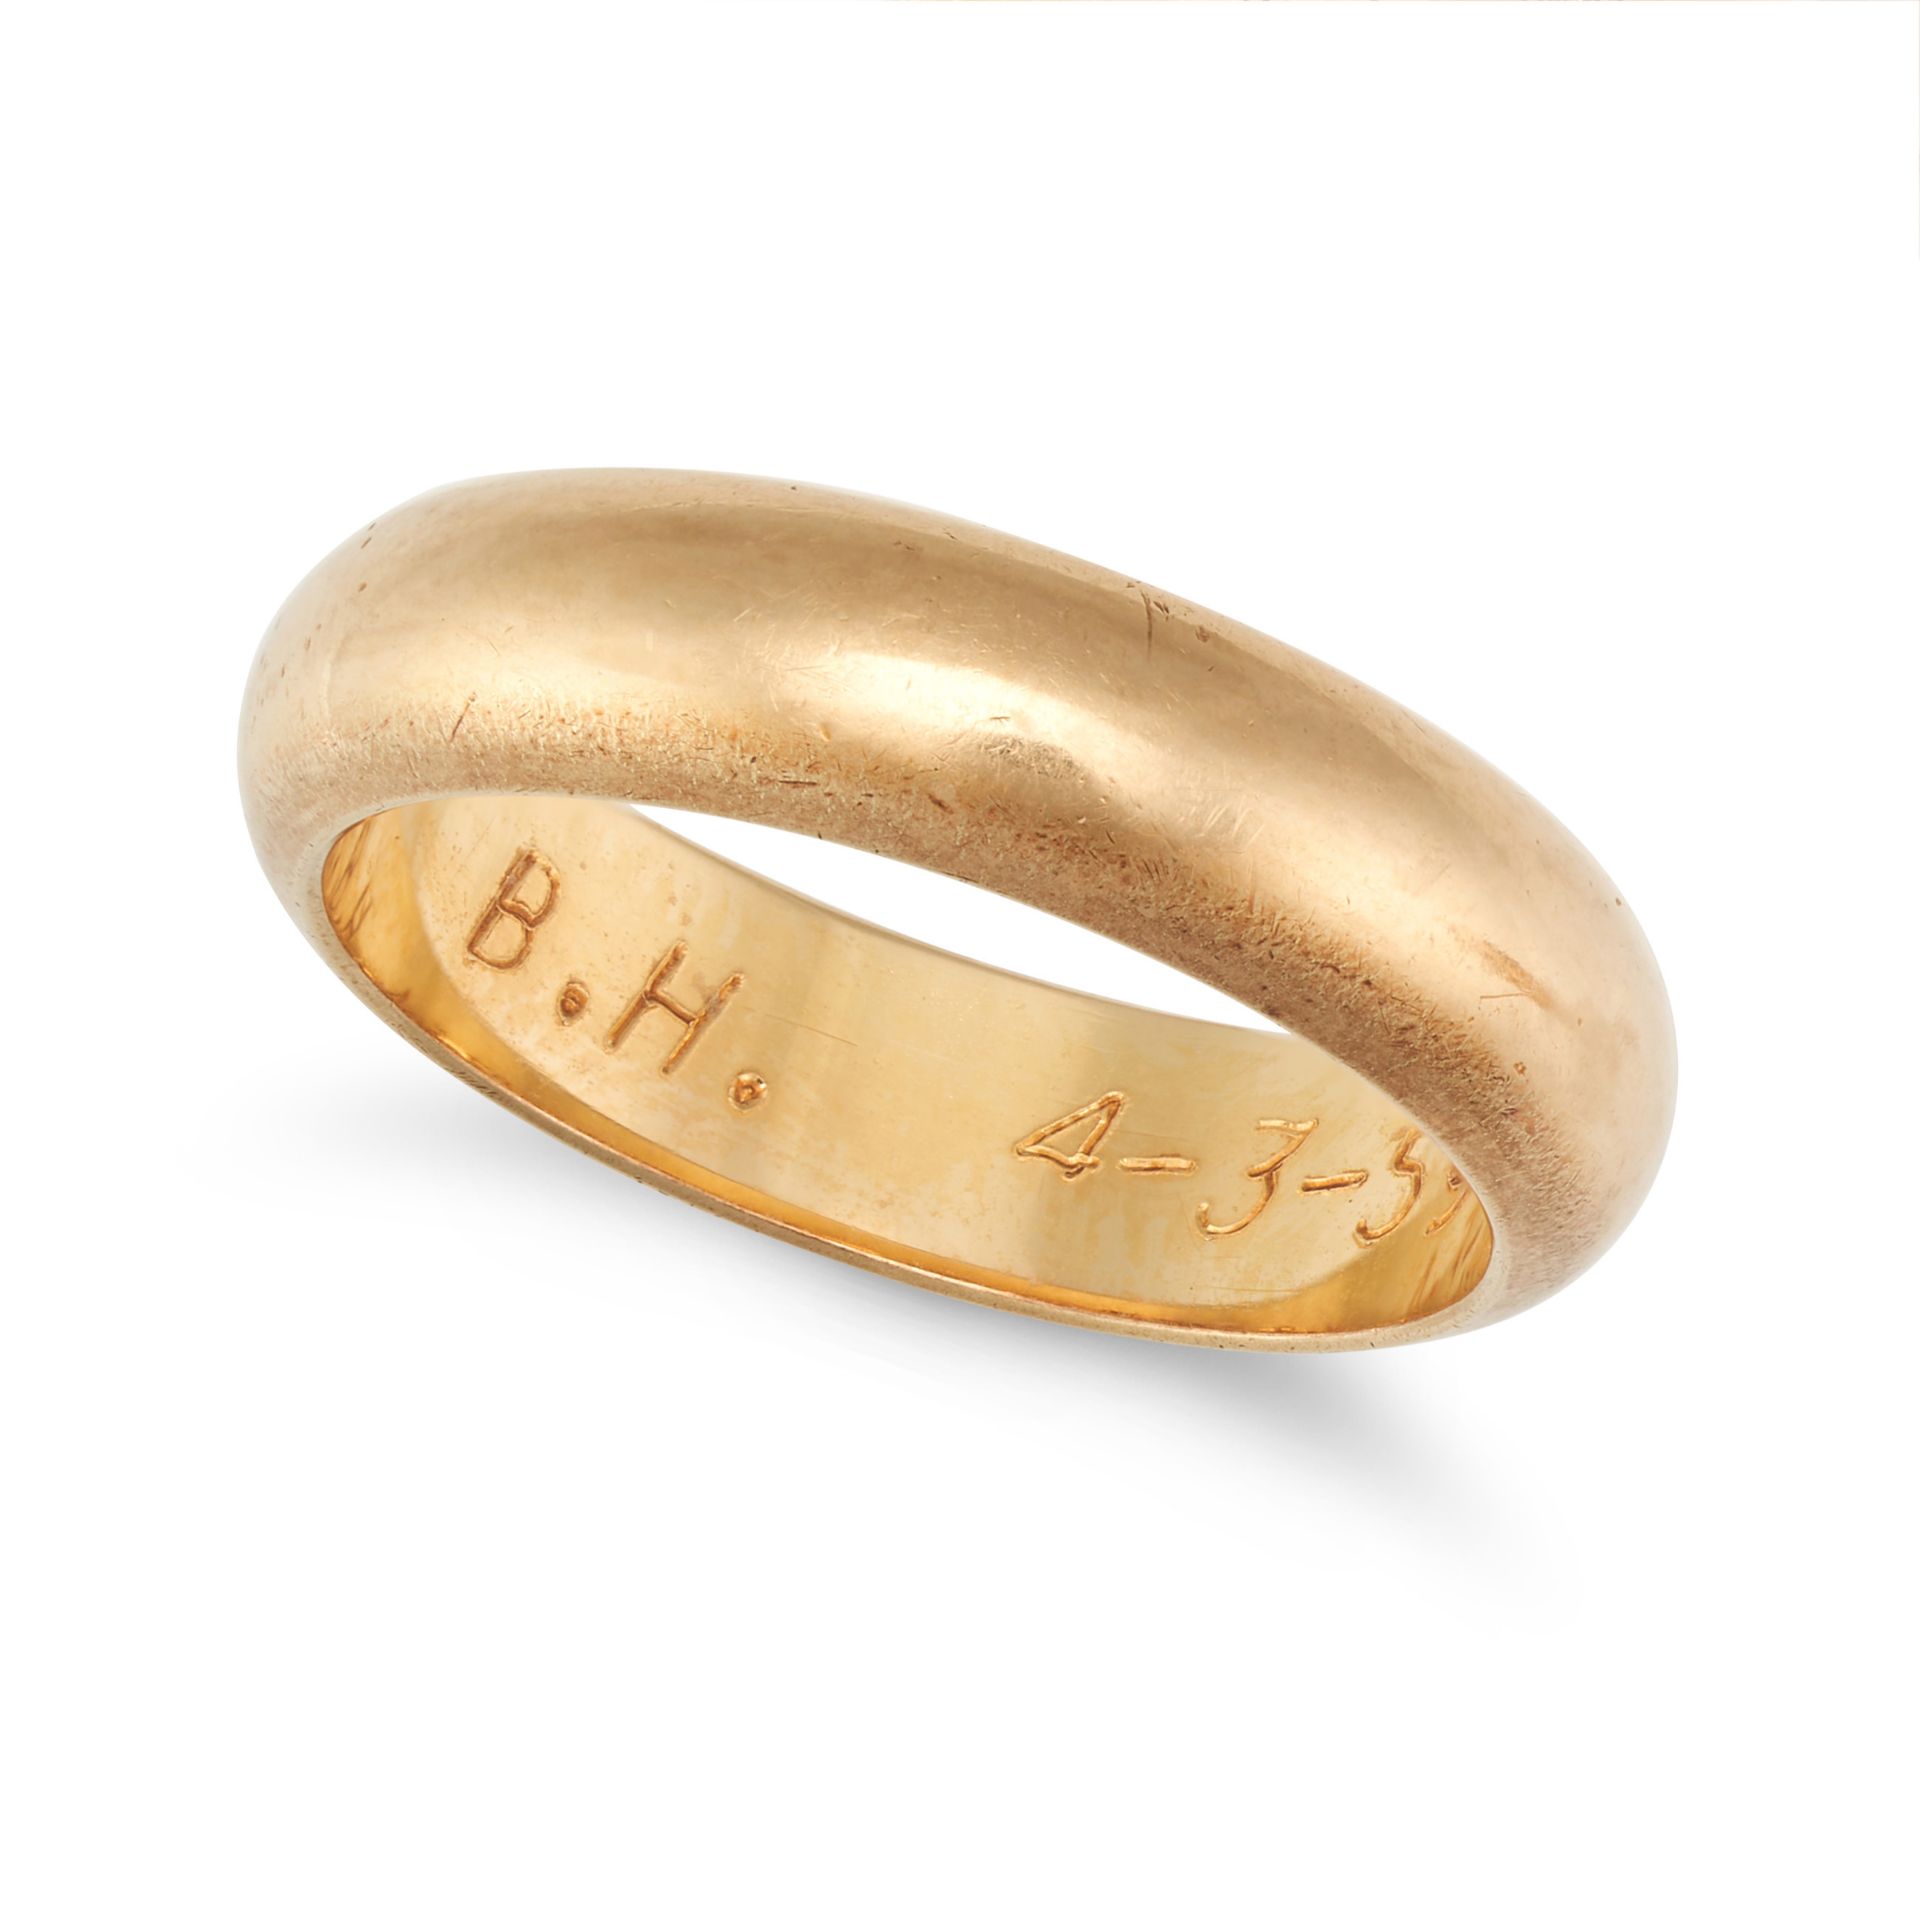 A THICK WEDDING BAND RING in 18ct yellow gold, inscribed 'B.H. 4-3-59', stamped 750, size M / 6.2...